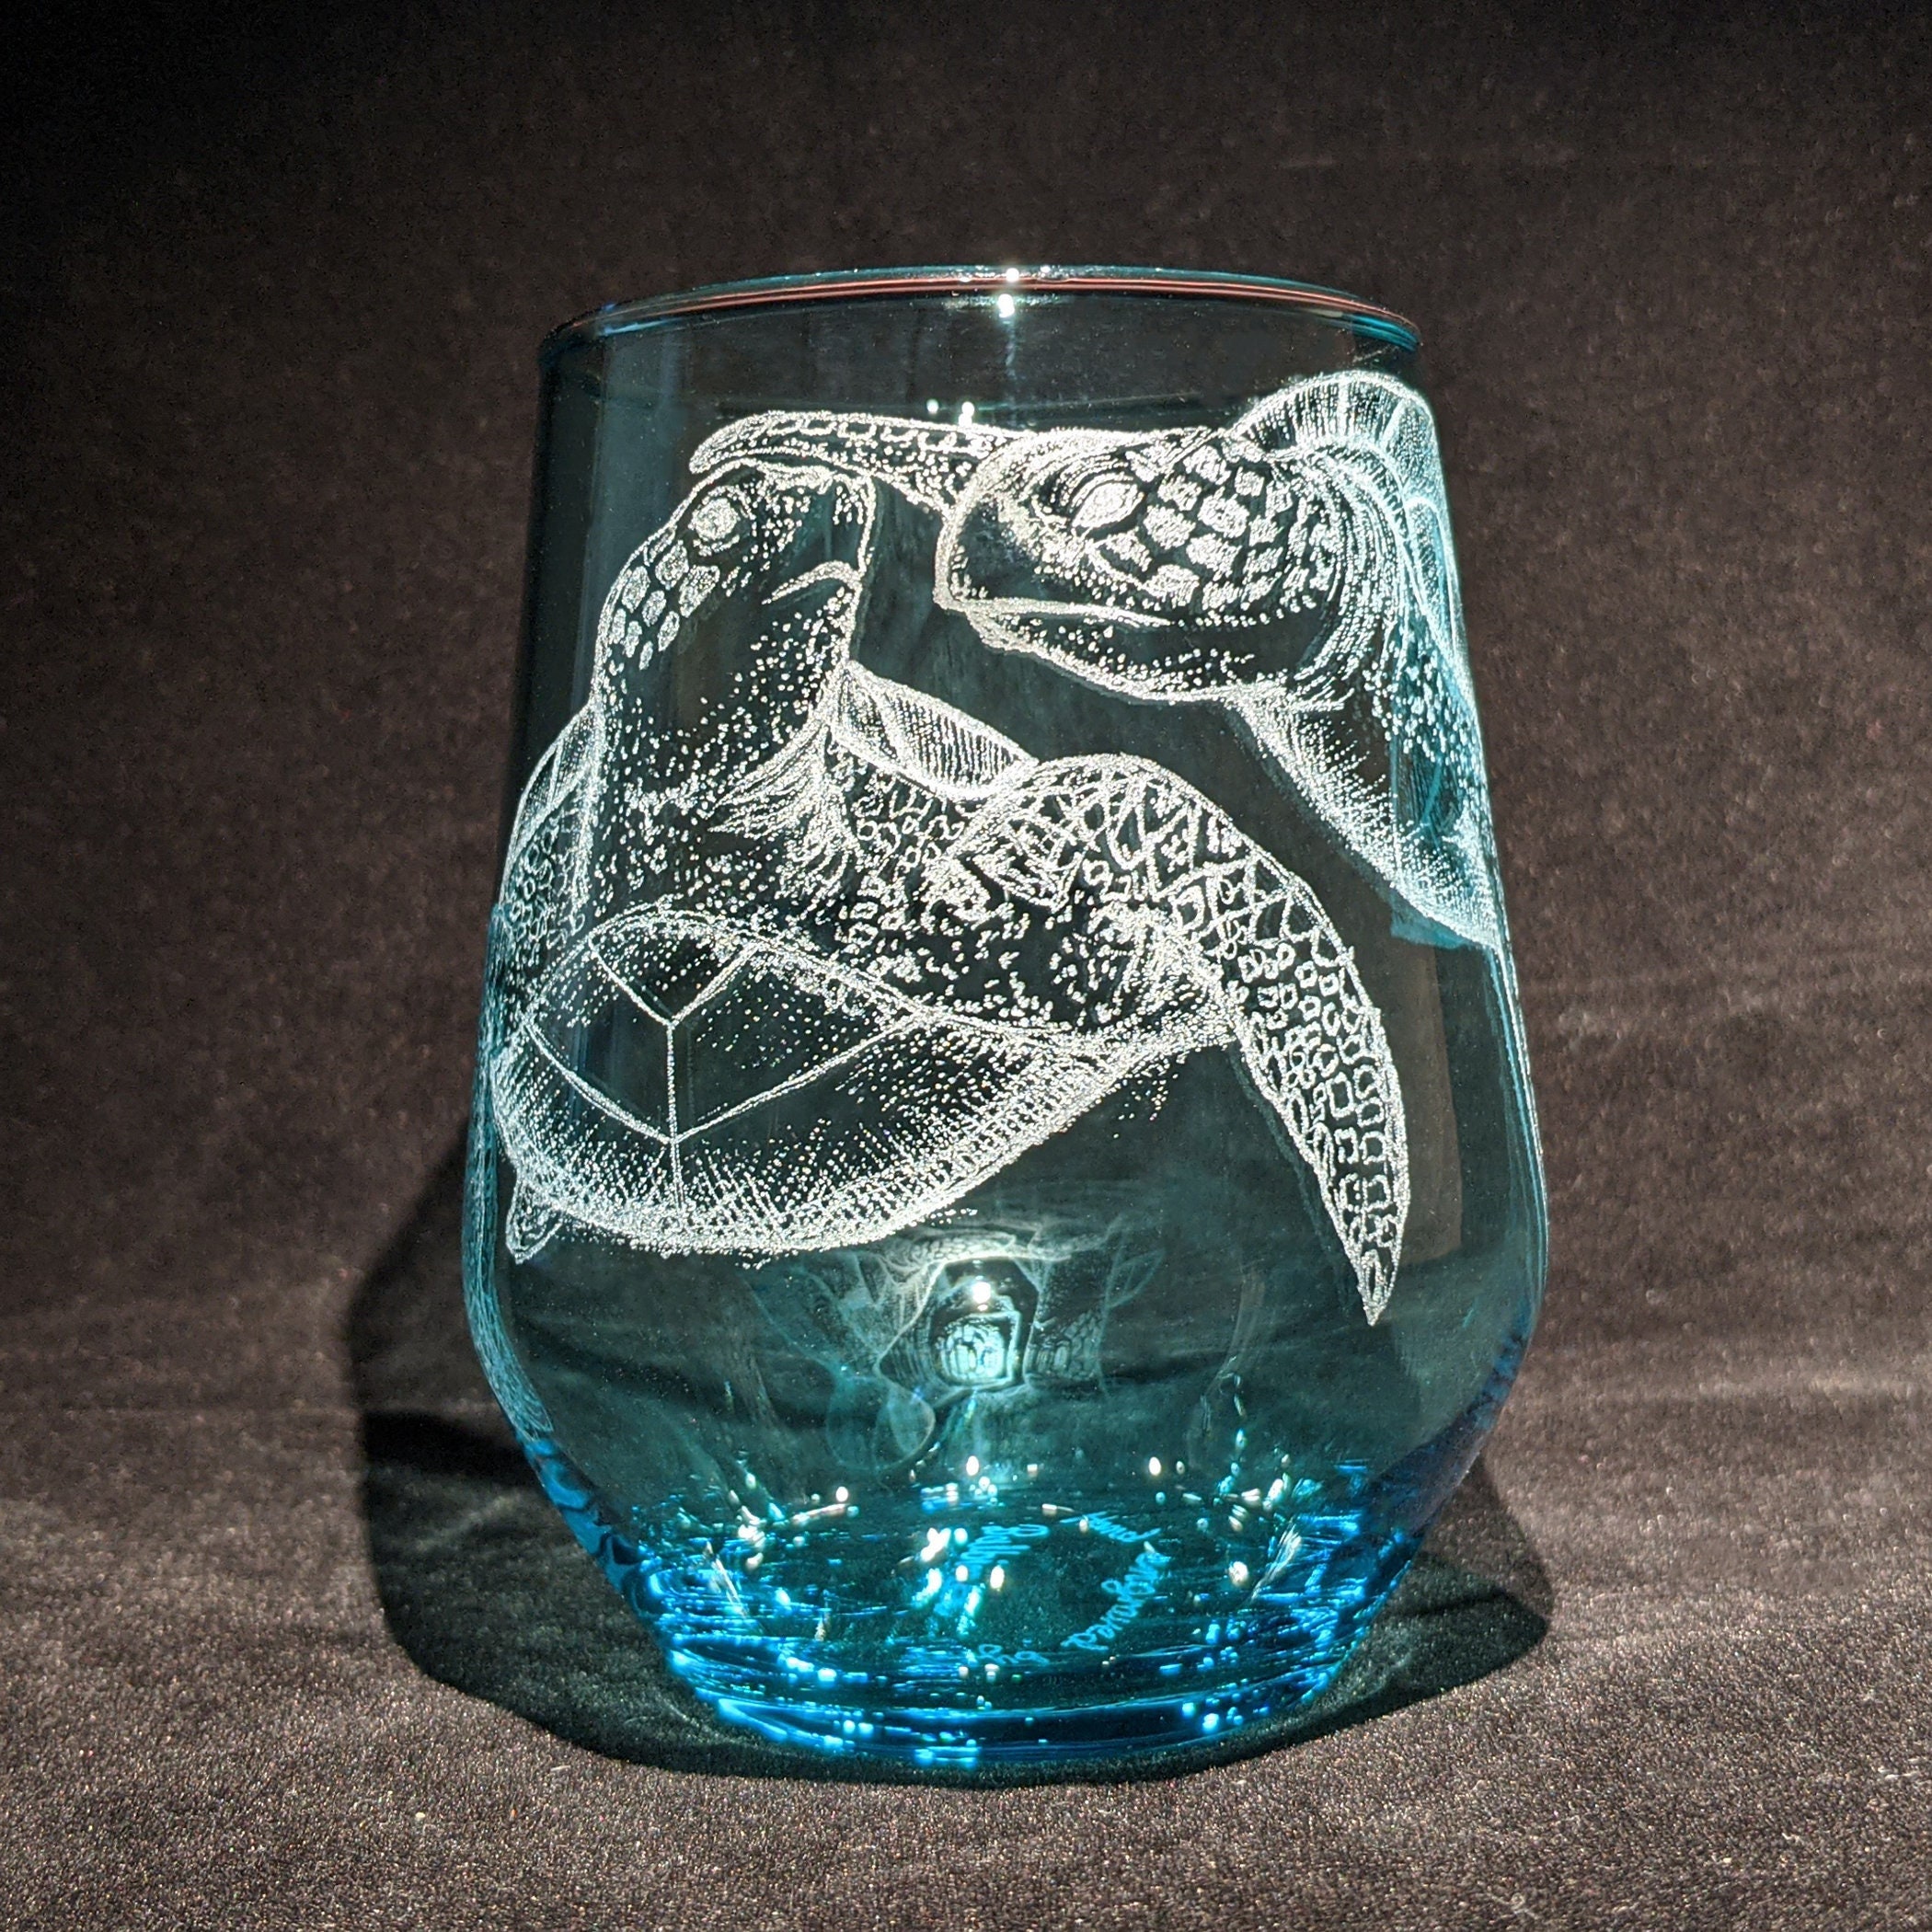 Crackle Wine Glasses with Tribal Sea Animals, Set of 4, One of Each -  Integrity Bottles